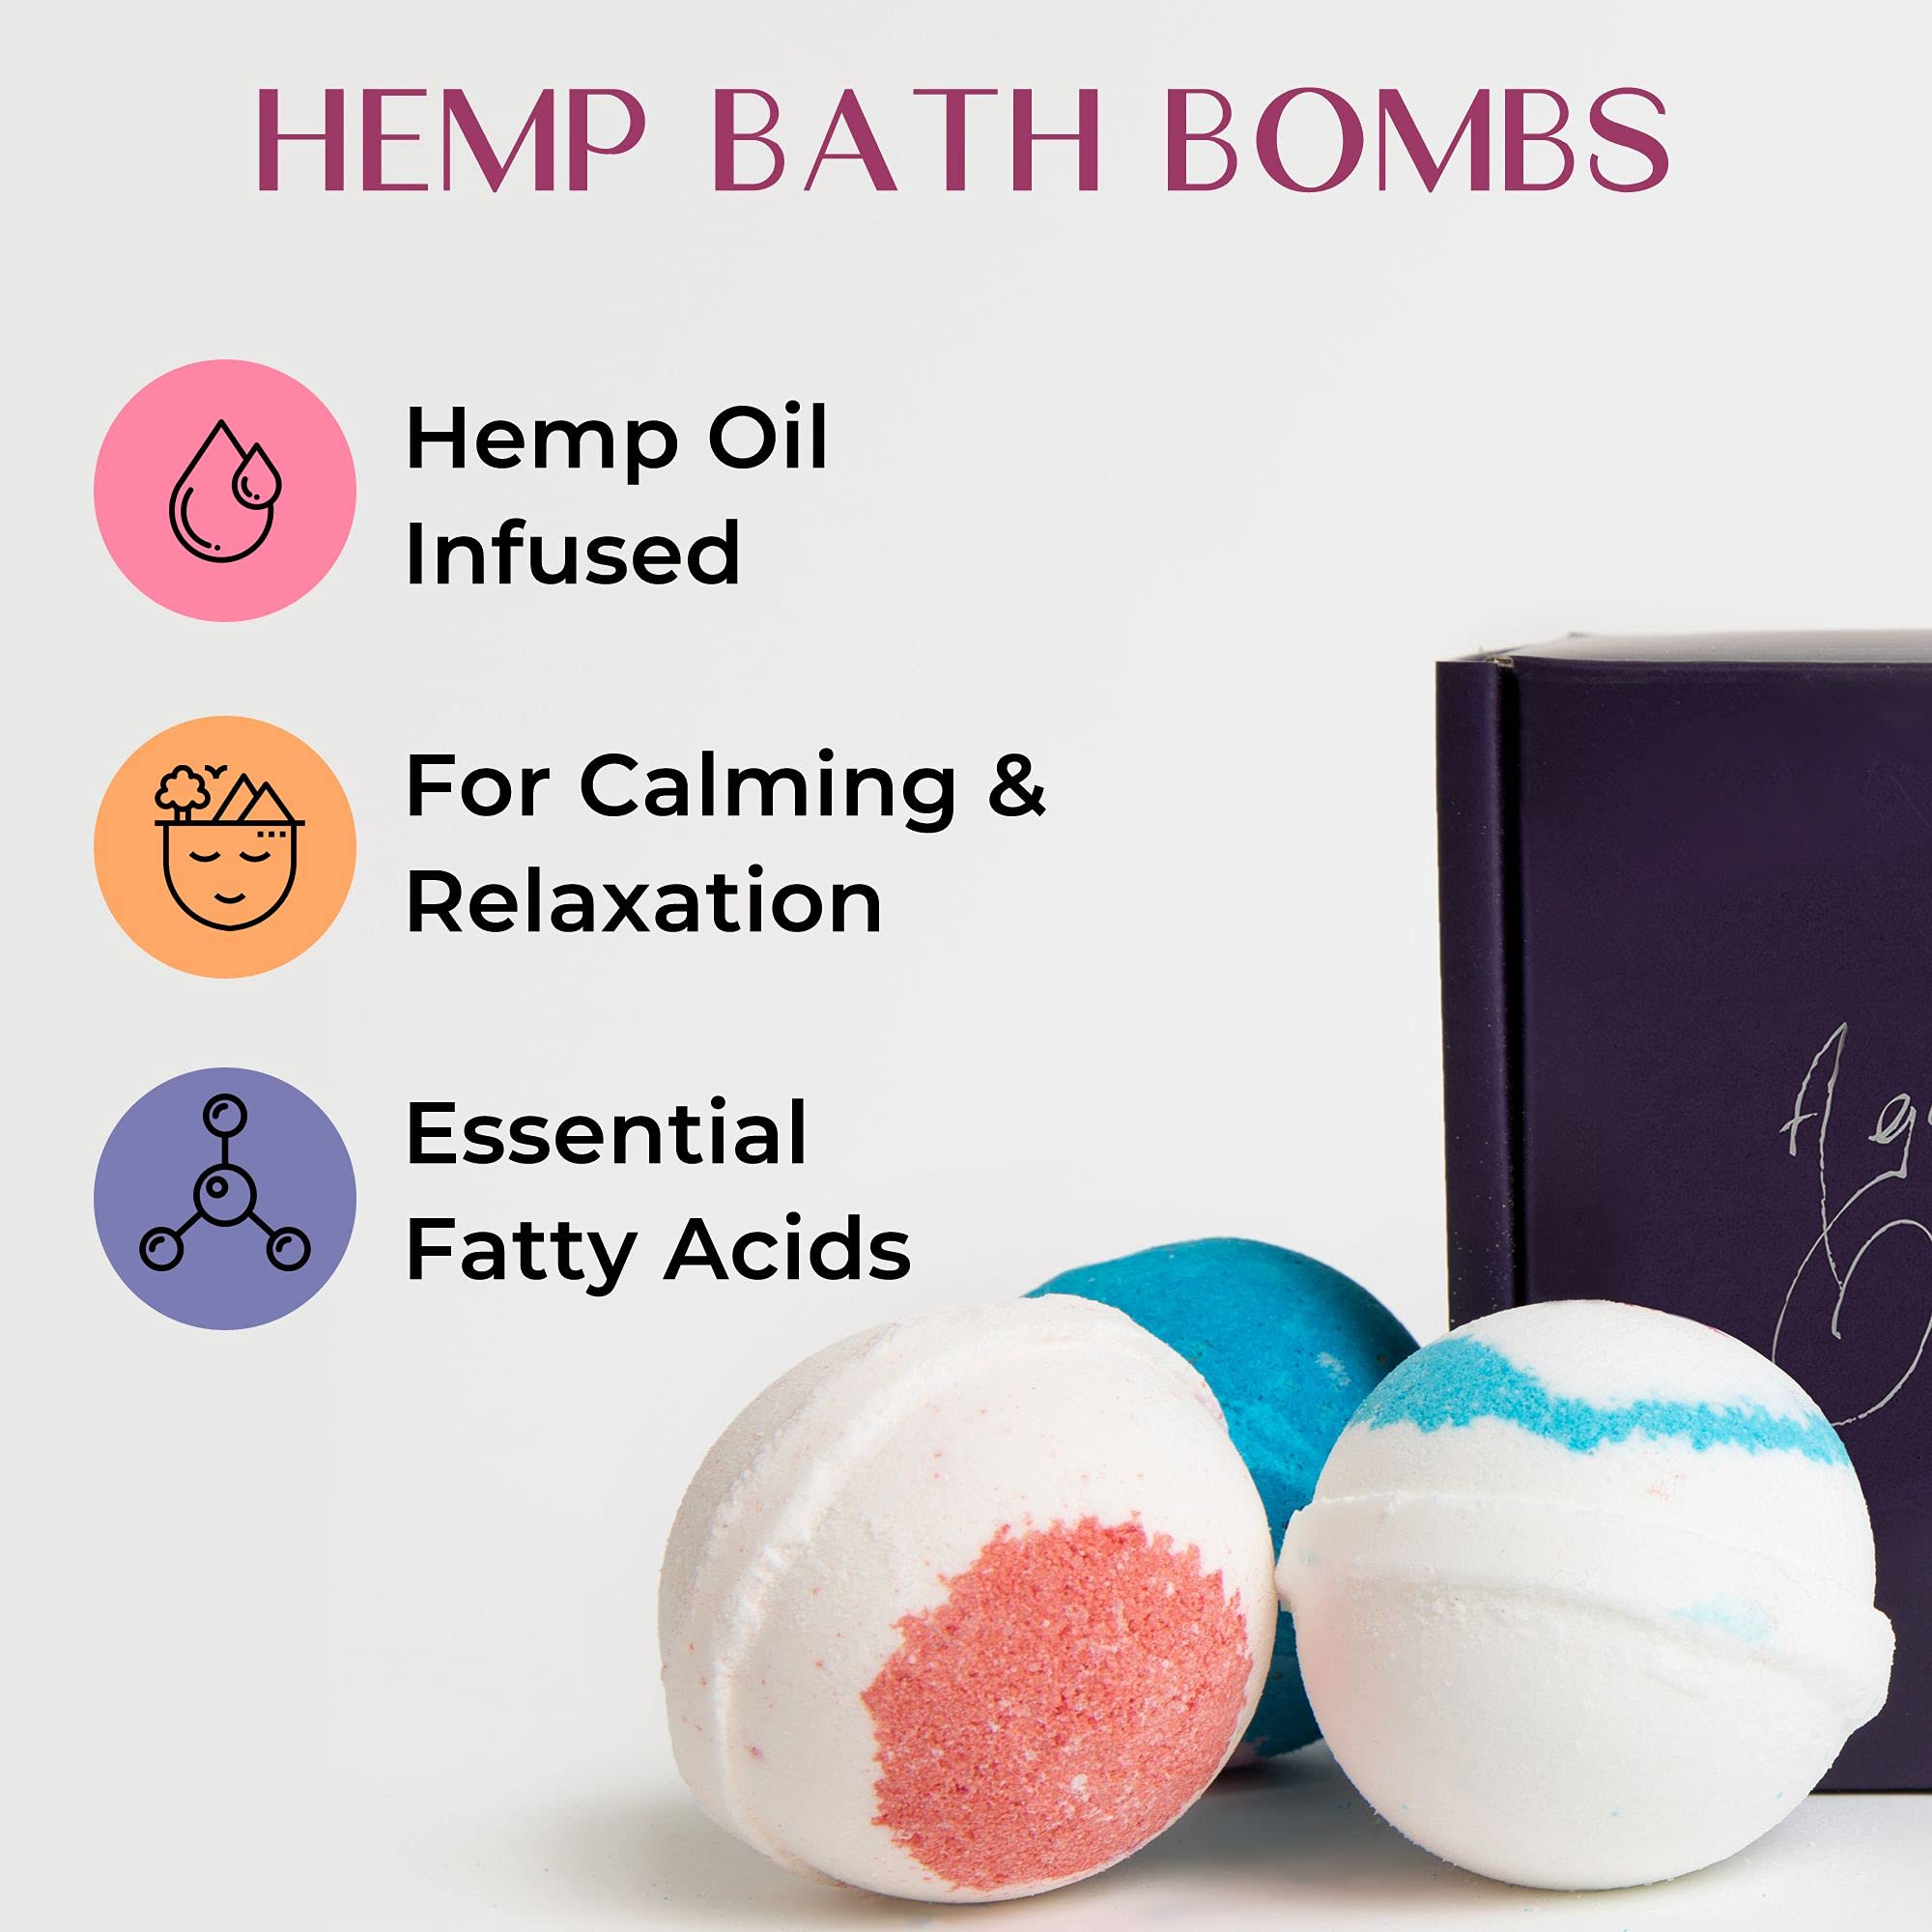 Organic Bath Bomb Gift Set - 6 Pack - Gifts for Women - Natural Coconut and Hemp Bath Bombs with Essential Oils – Mother's Day Gifts for Mom or Wife - Made in The USA